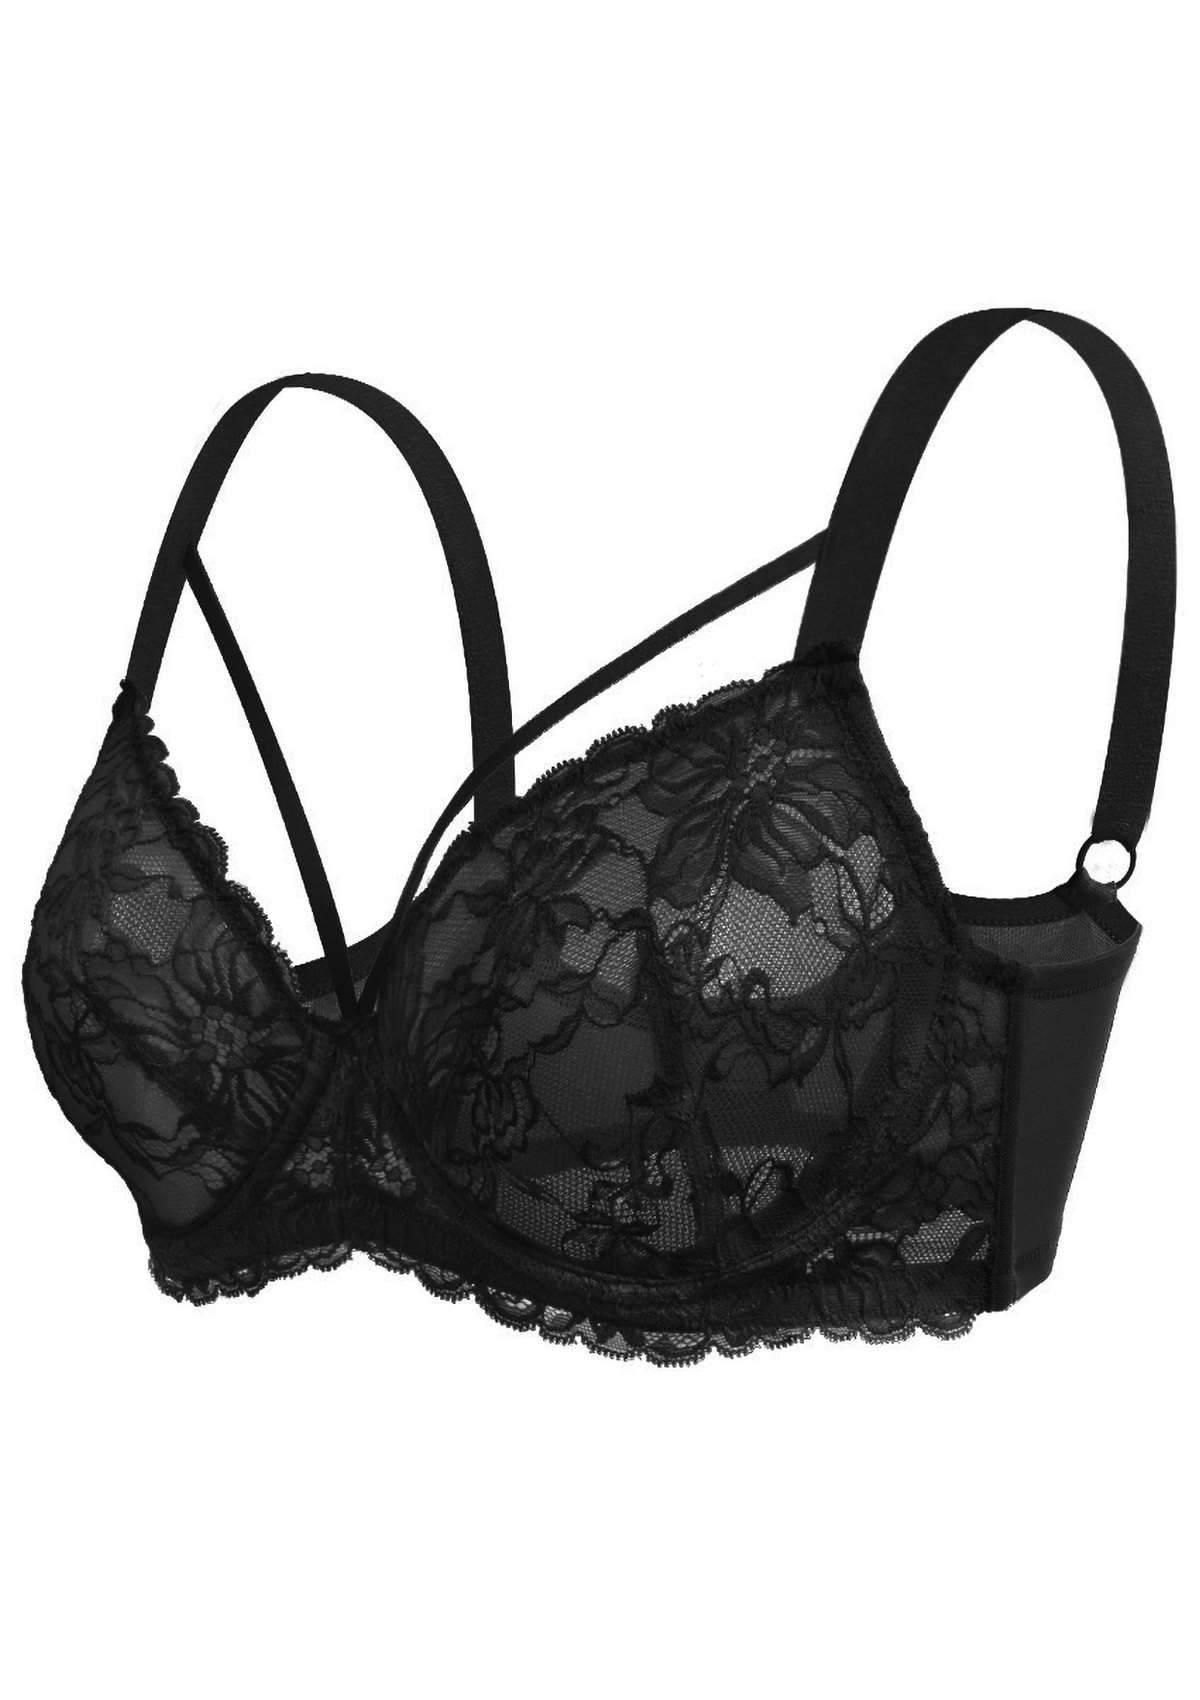 HSIA Pretty In Petals Bra - Plus Size Lingerie For Comfrot And Support - Black / 38 / DDD/F